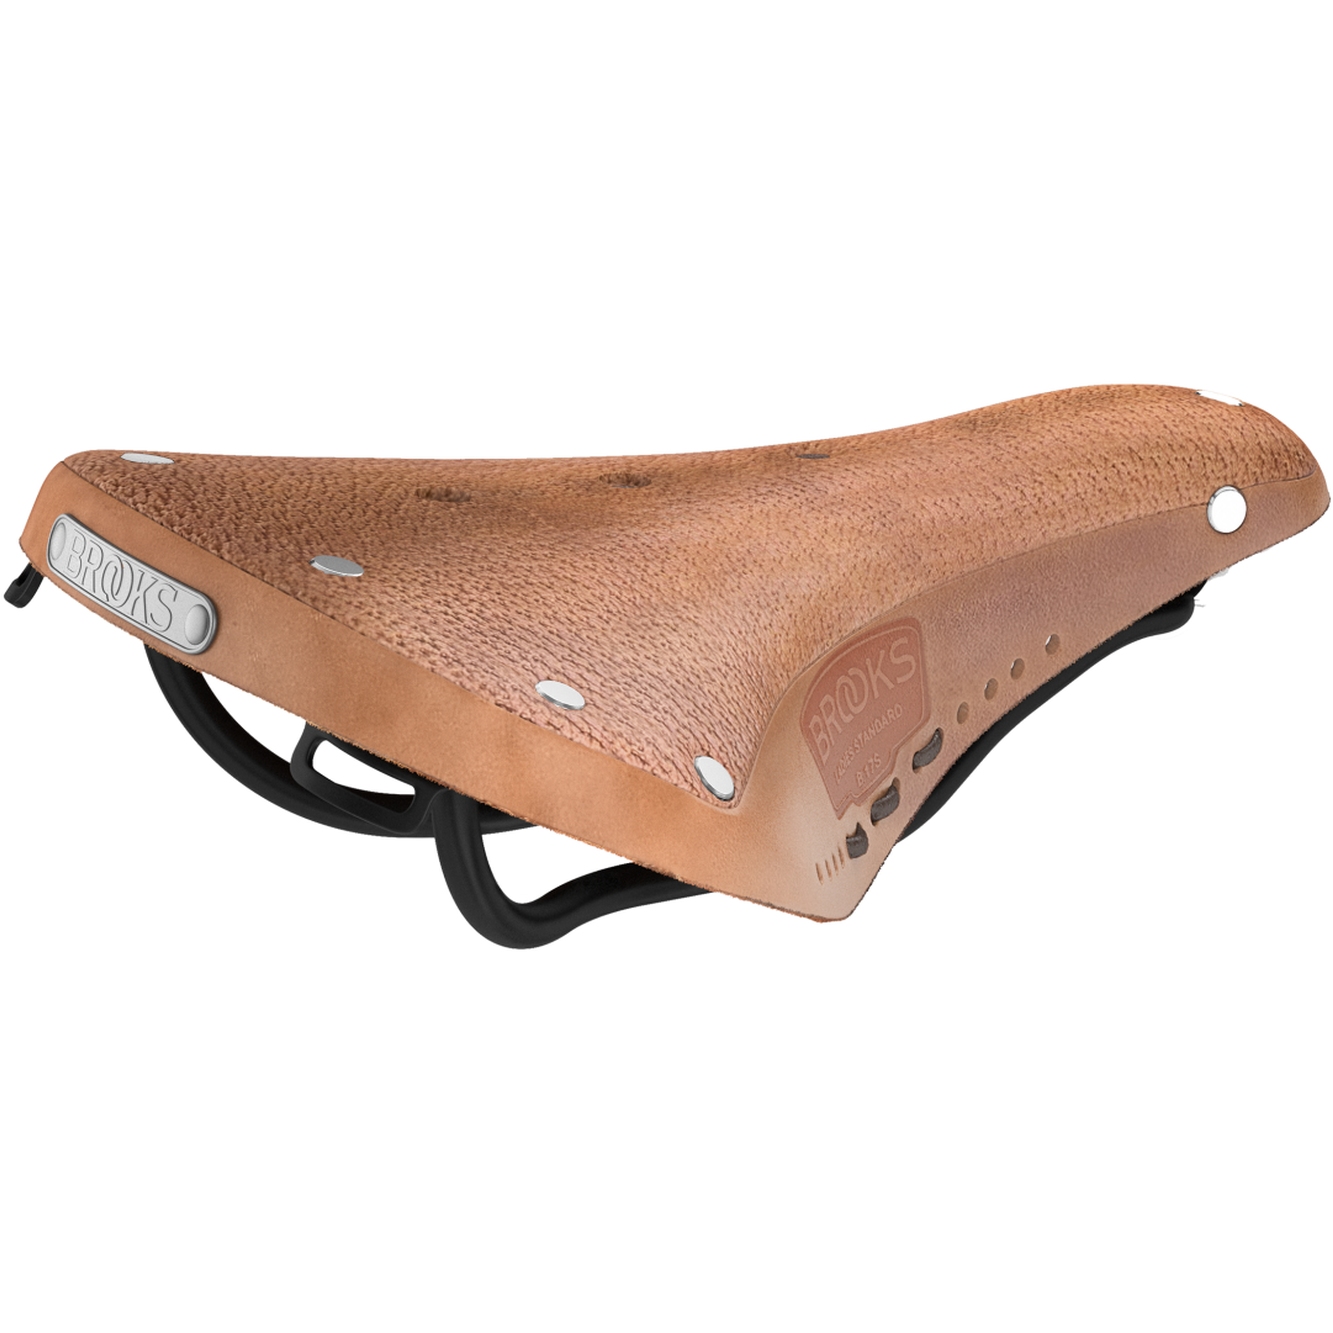 Picture of Brooks B17 Softened Short Bend Leather Saddle - Dark Tan